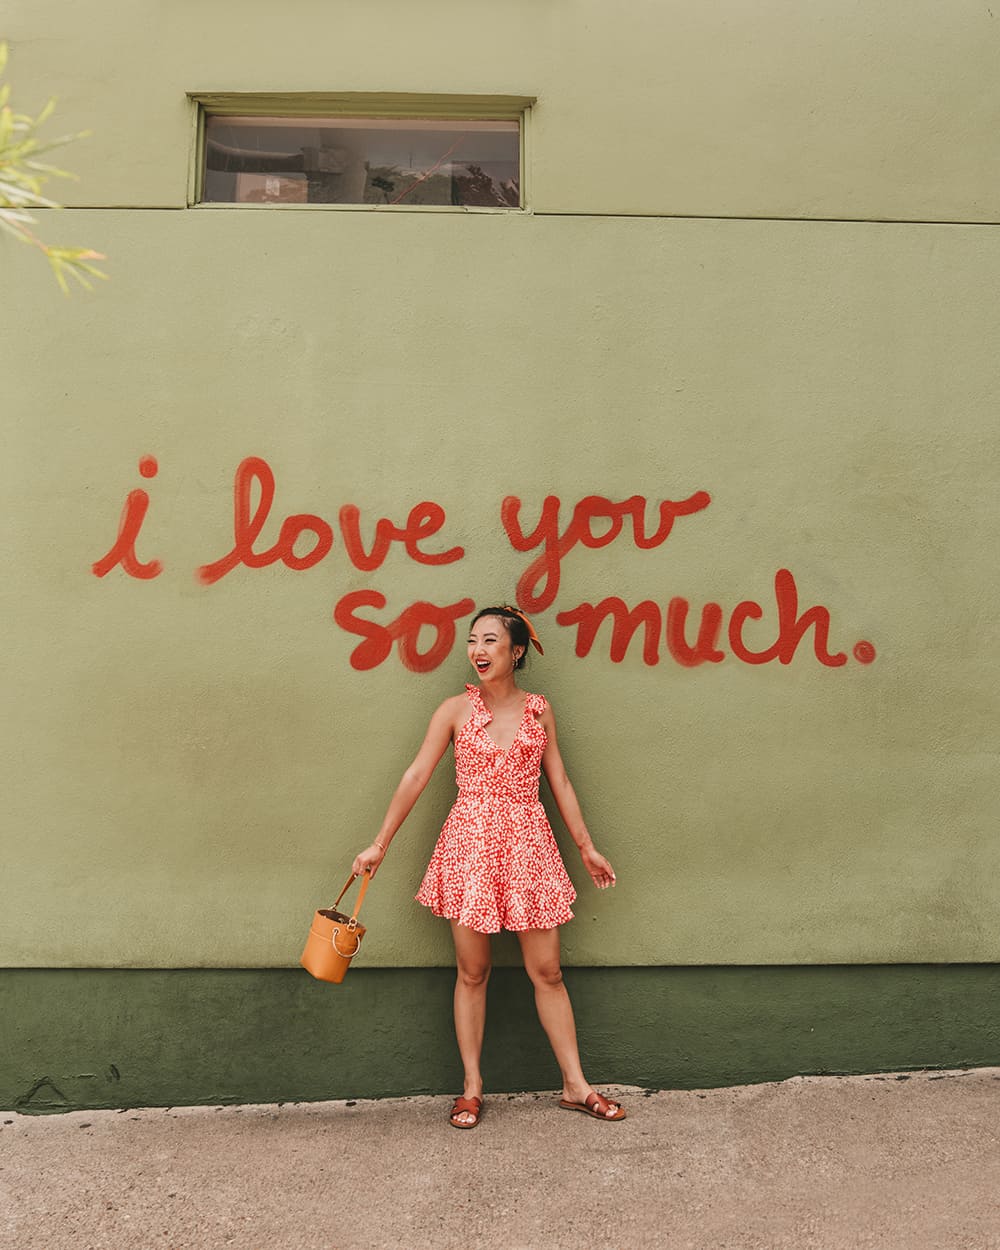 I Love You So Much wall in Austin Texas